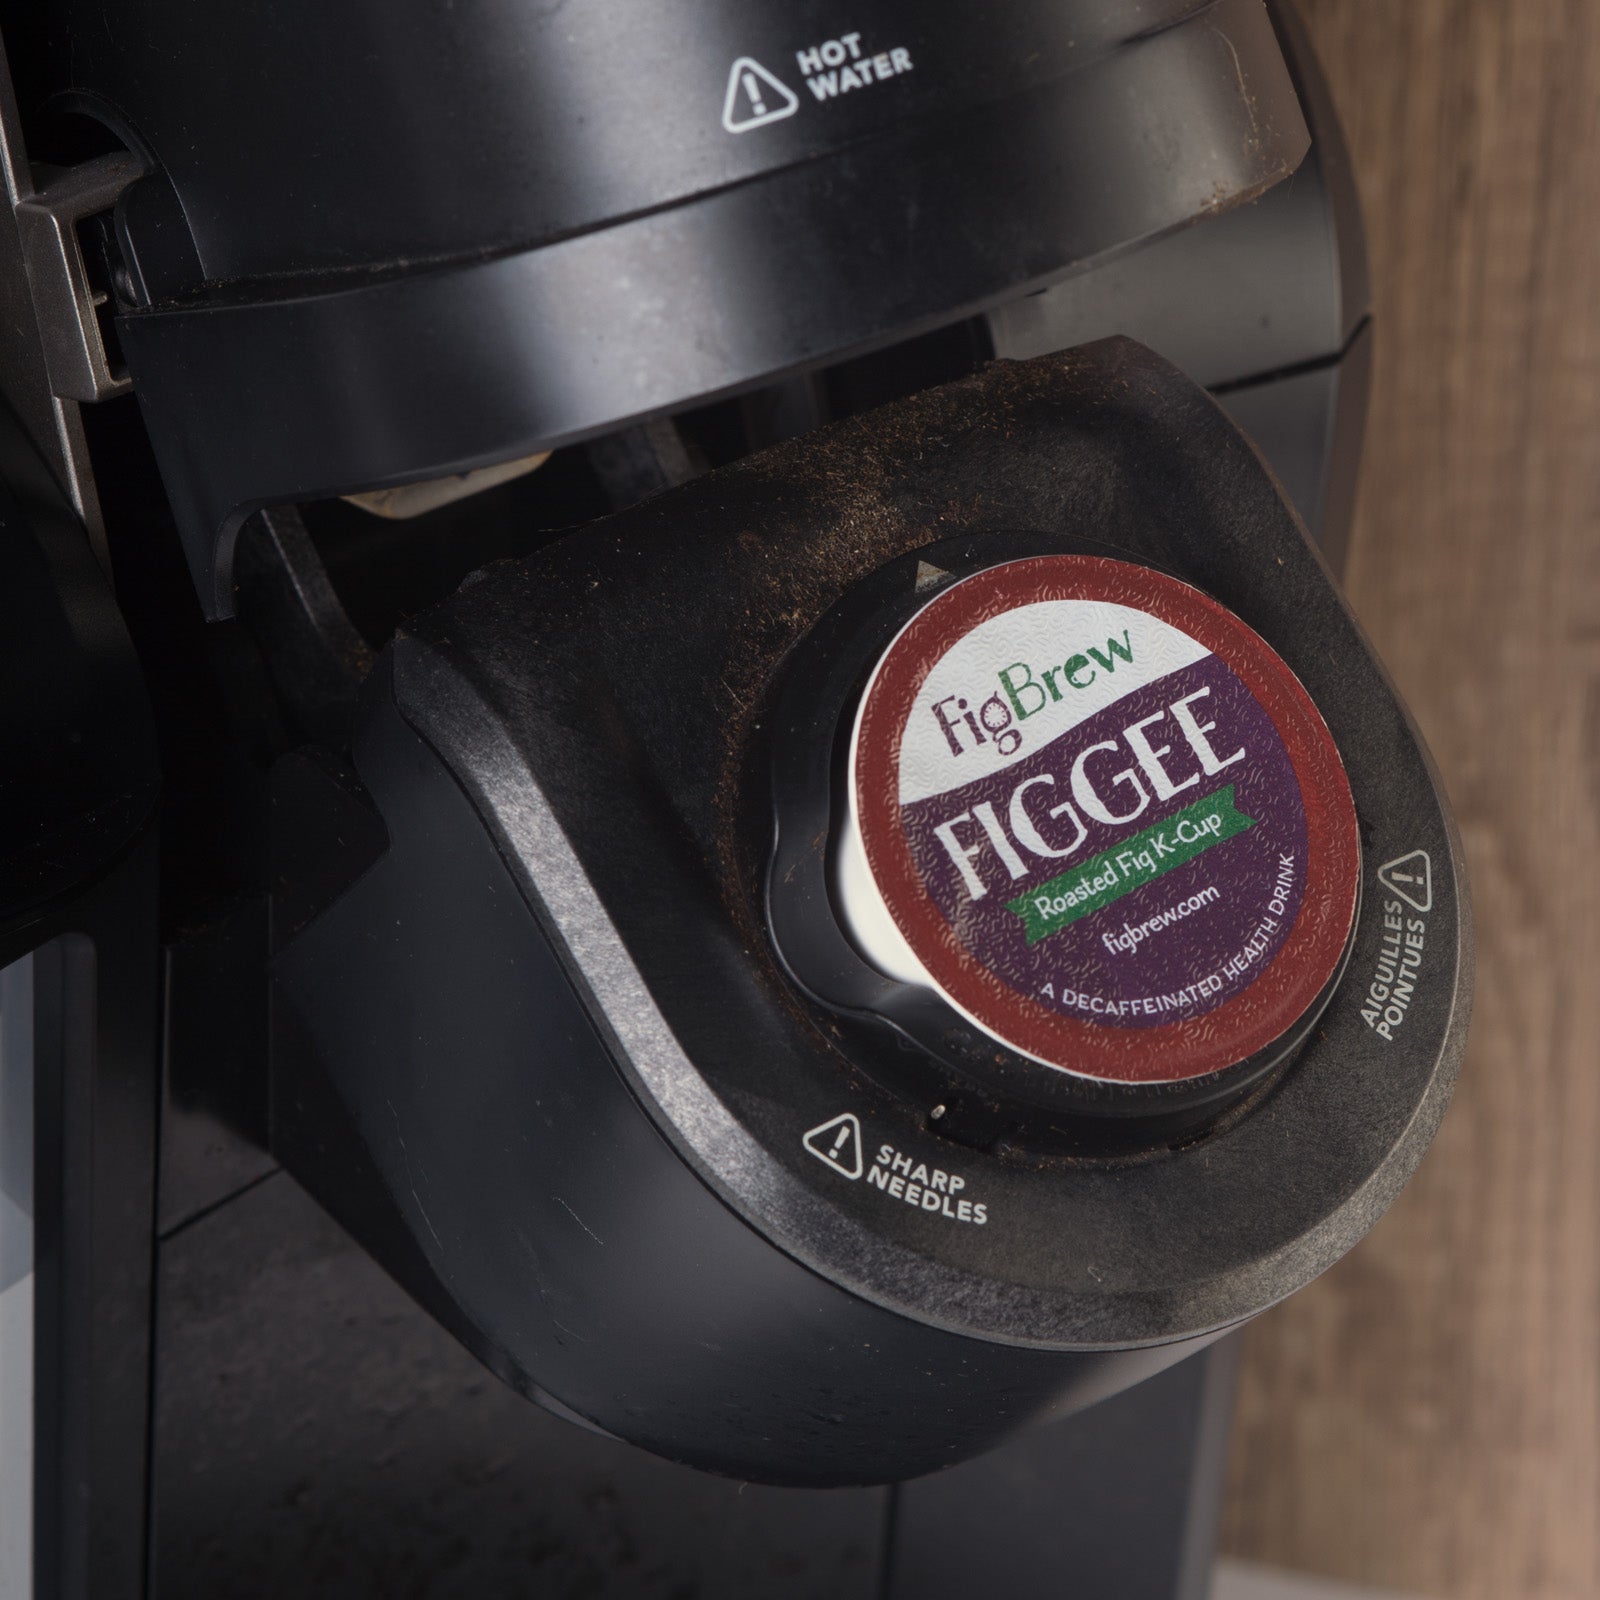 FIGGEE K-Cup